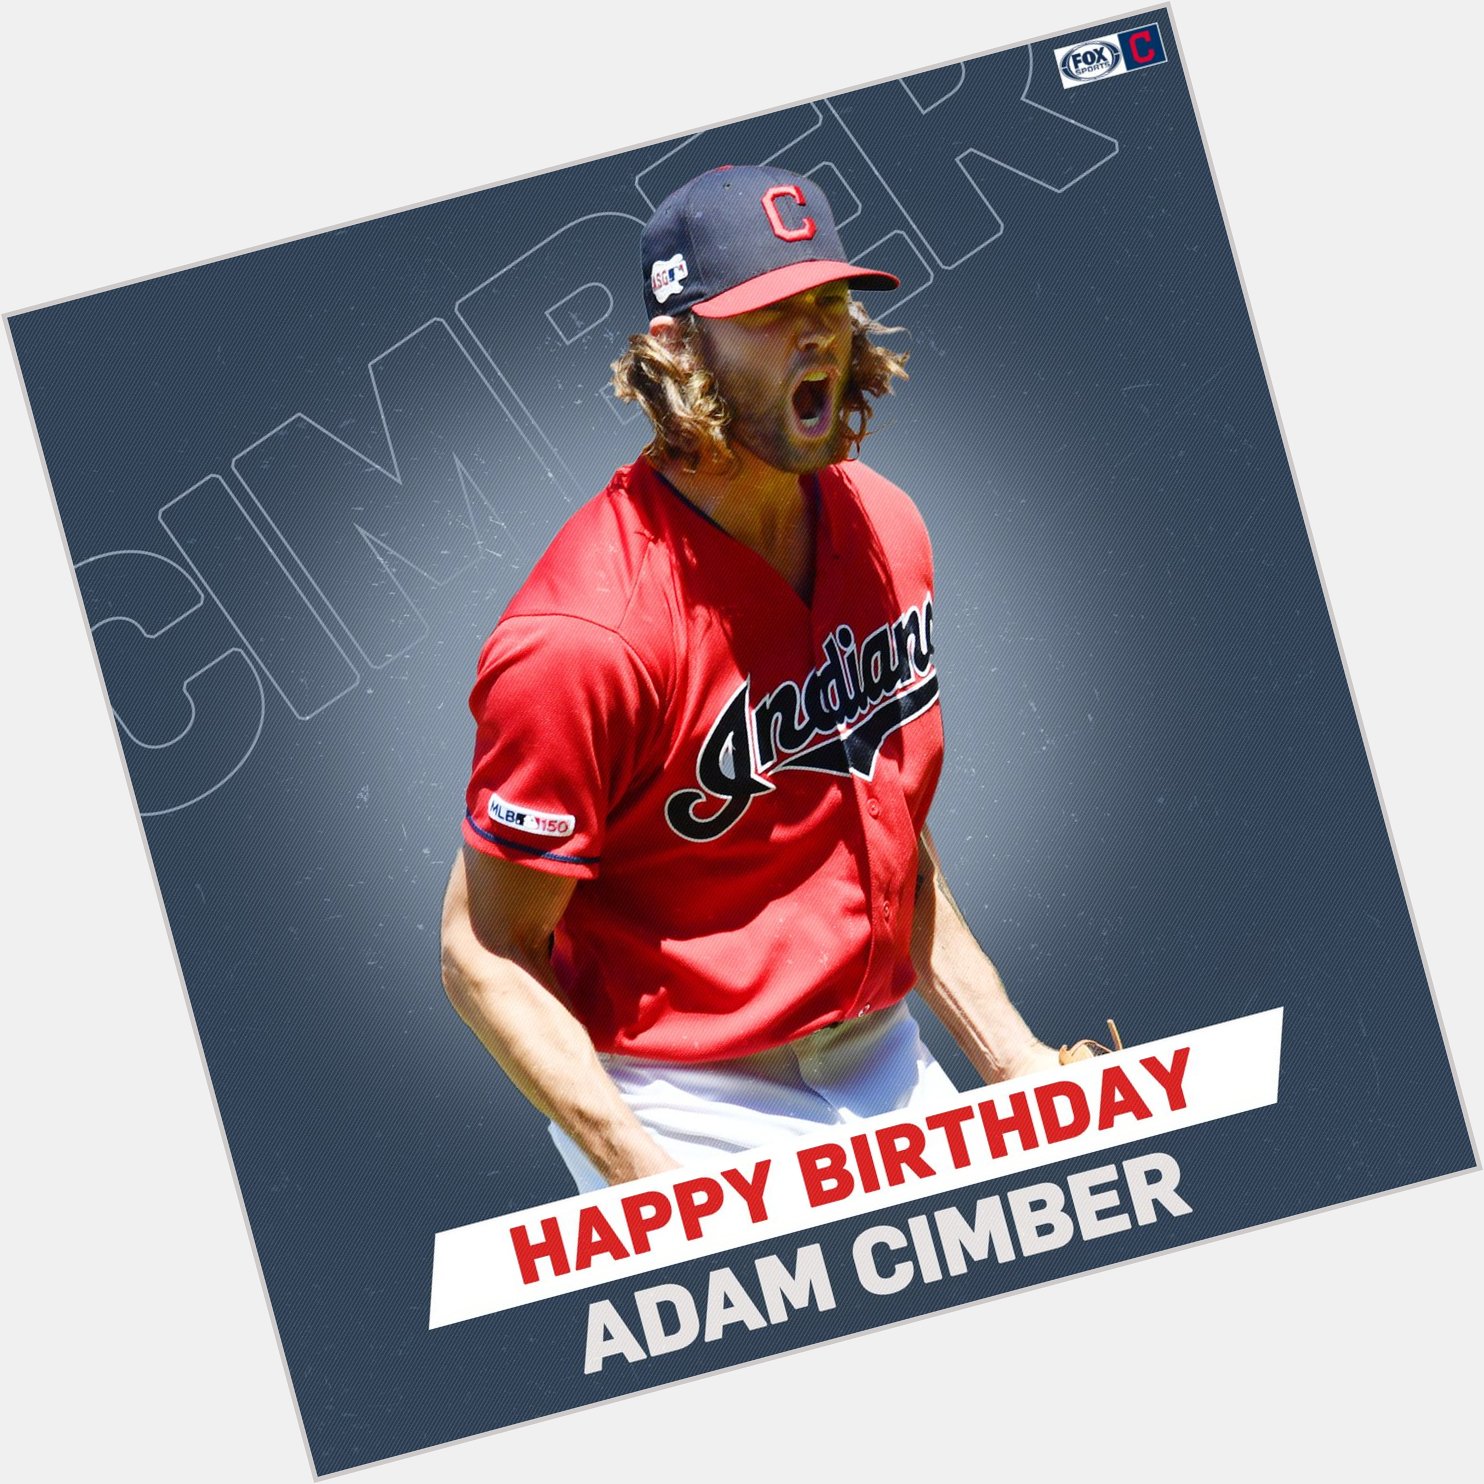 What\s better than one birthday? TWO!

Happy birthday to Adam Cimber and Oliver Perez! 